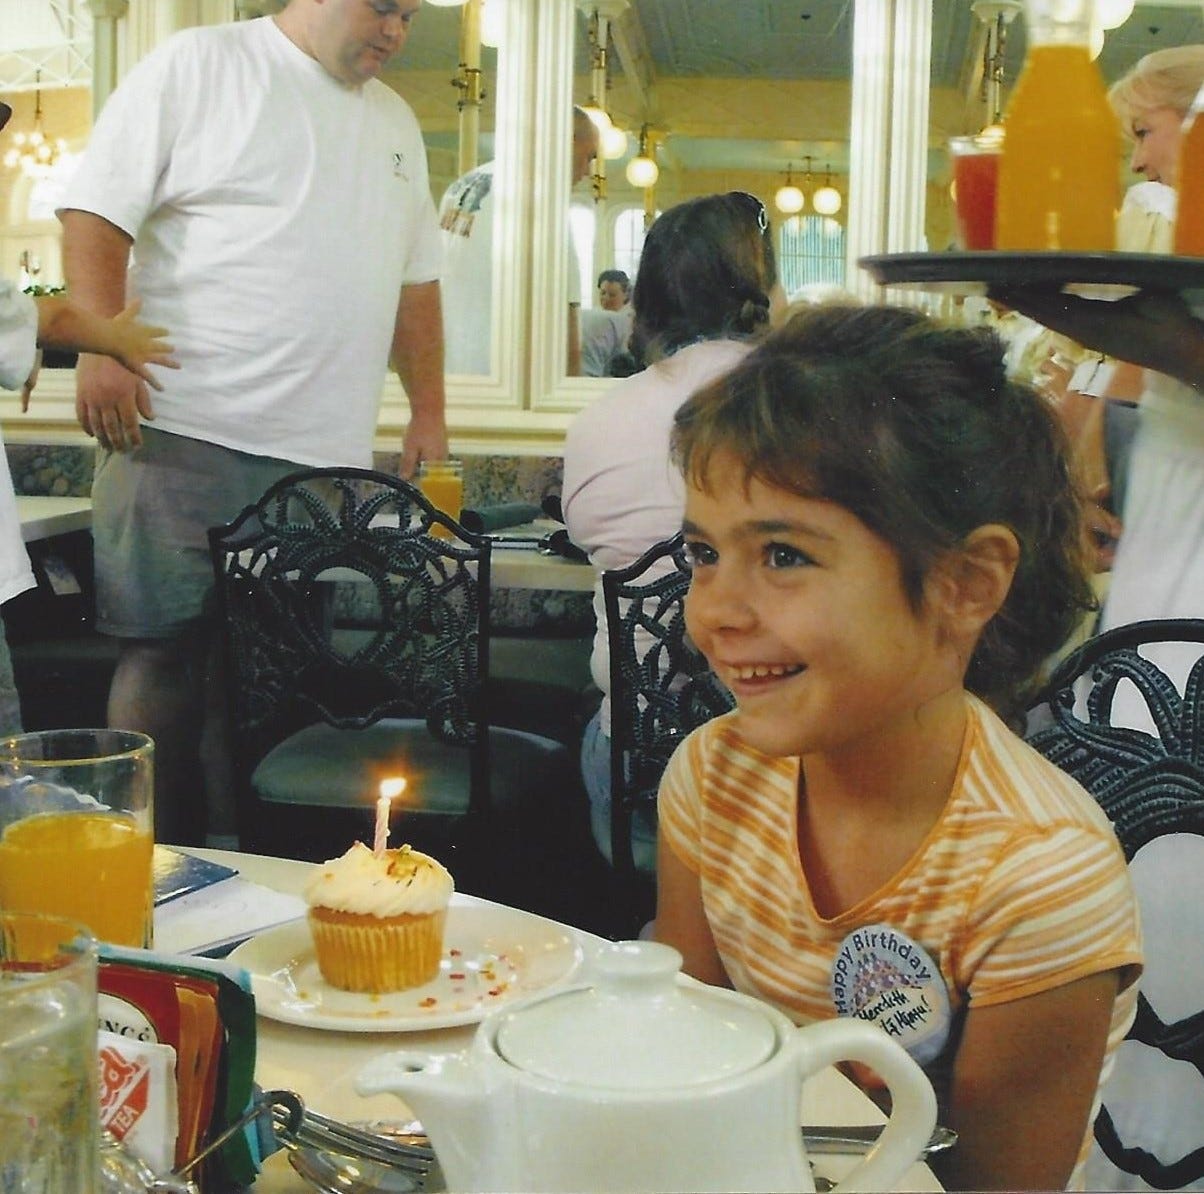 7-year-old girl sits by a cupcake with a birthday candle in it and smiles while others sing happy birthday to her